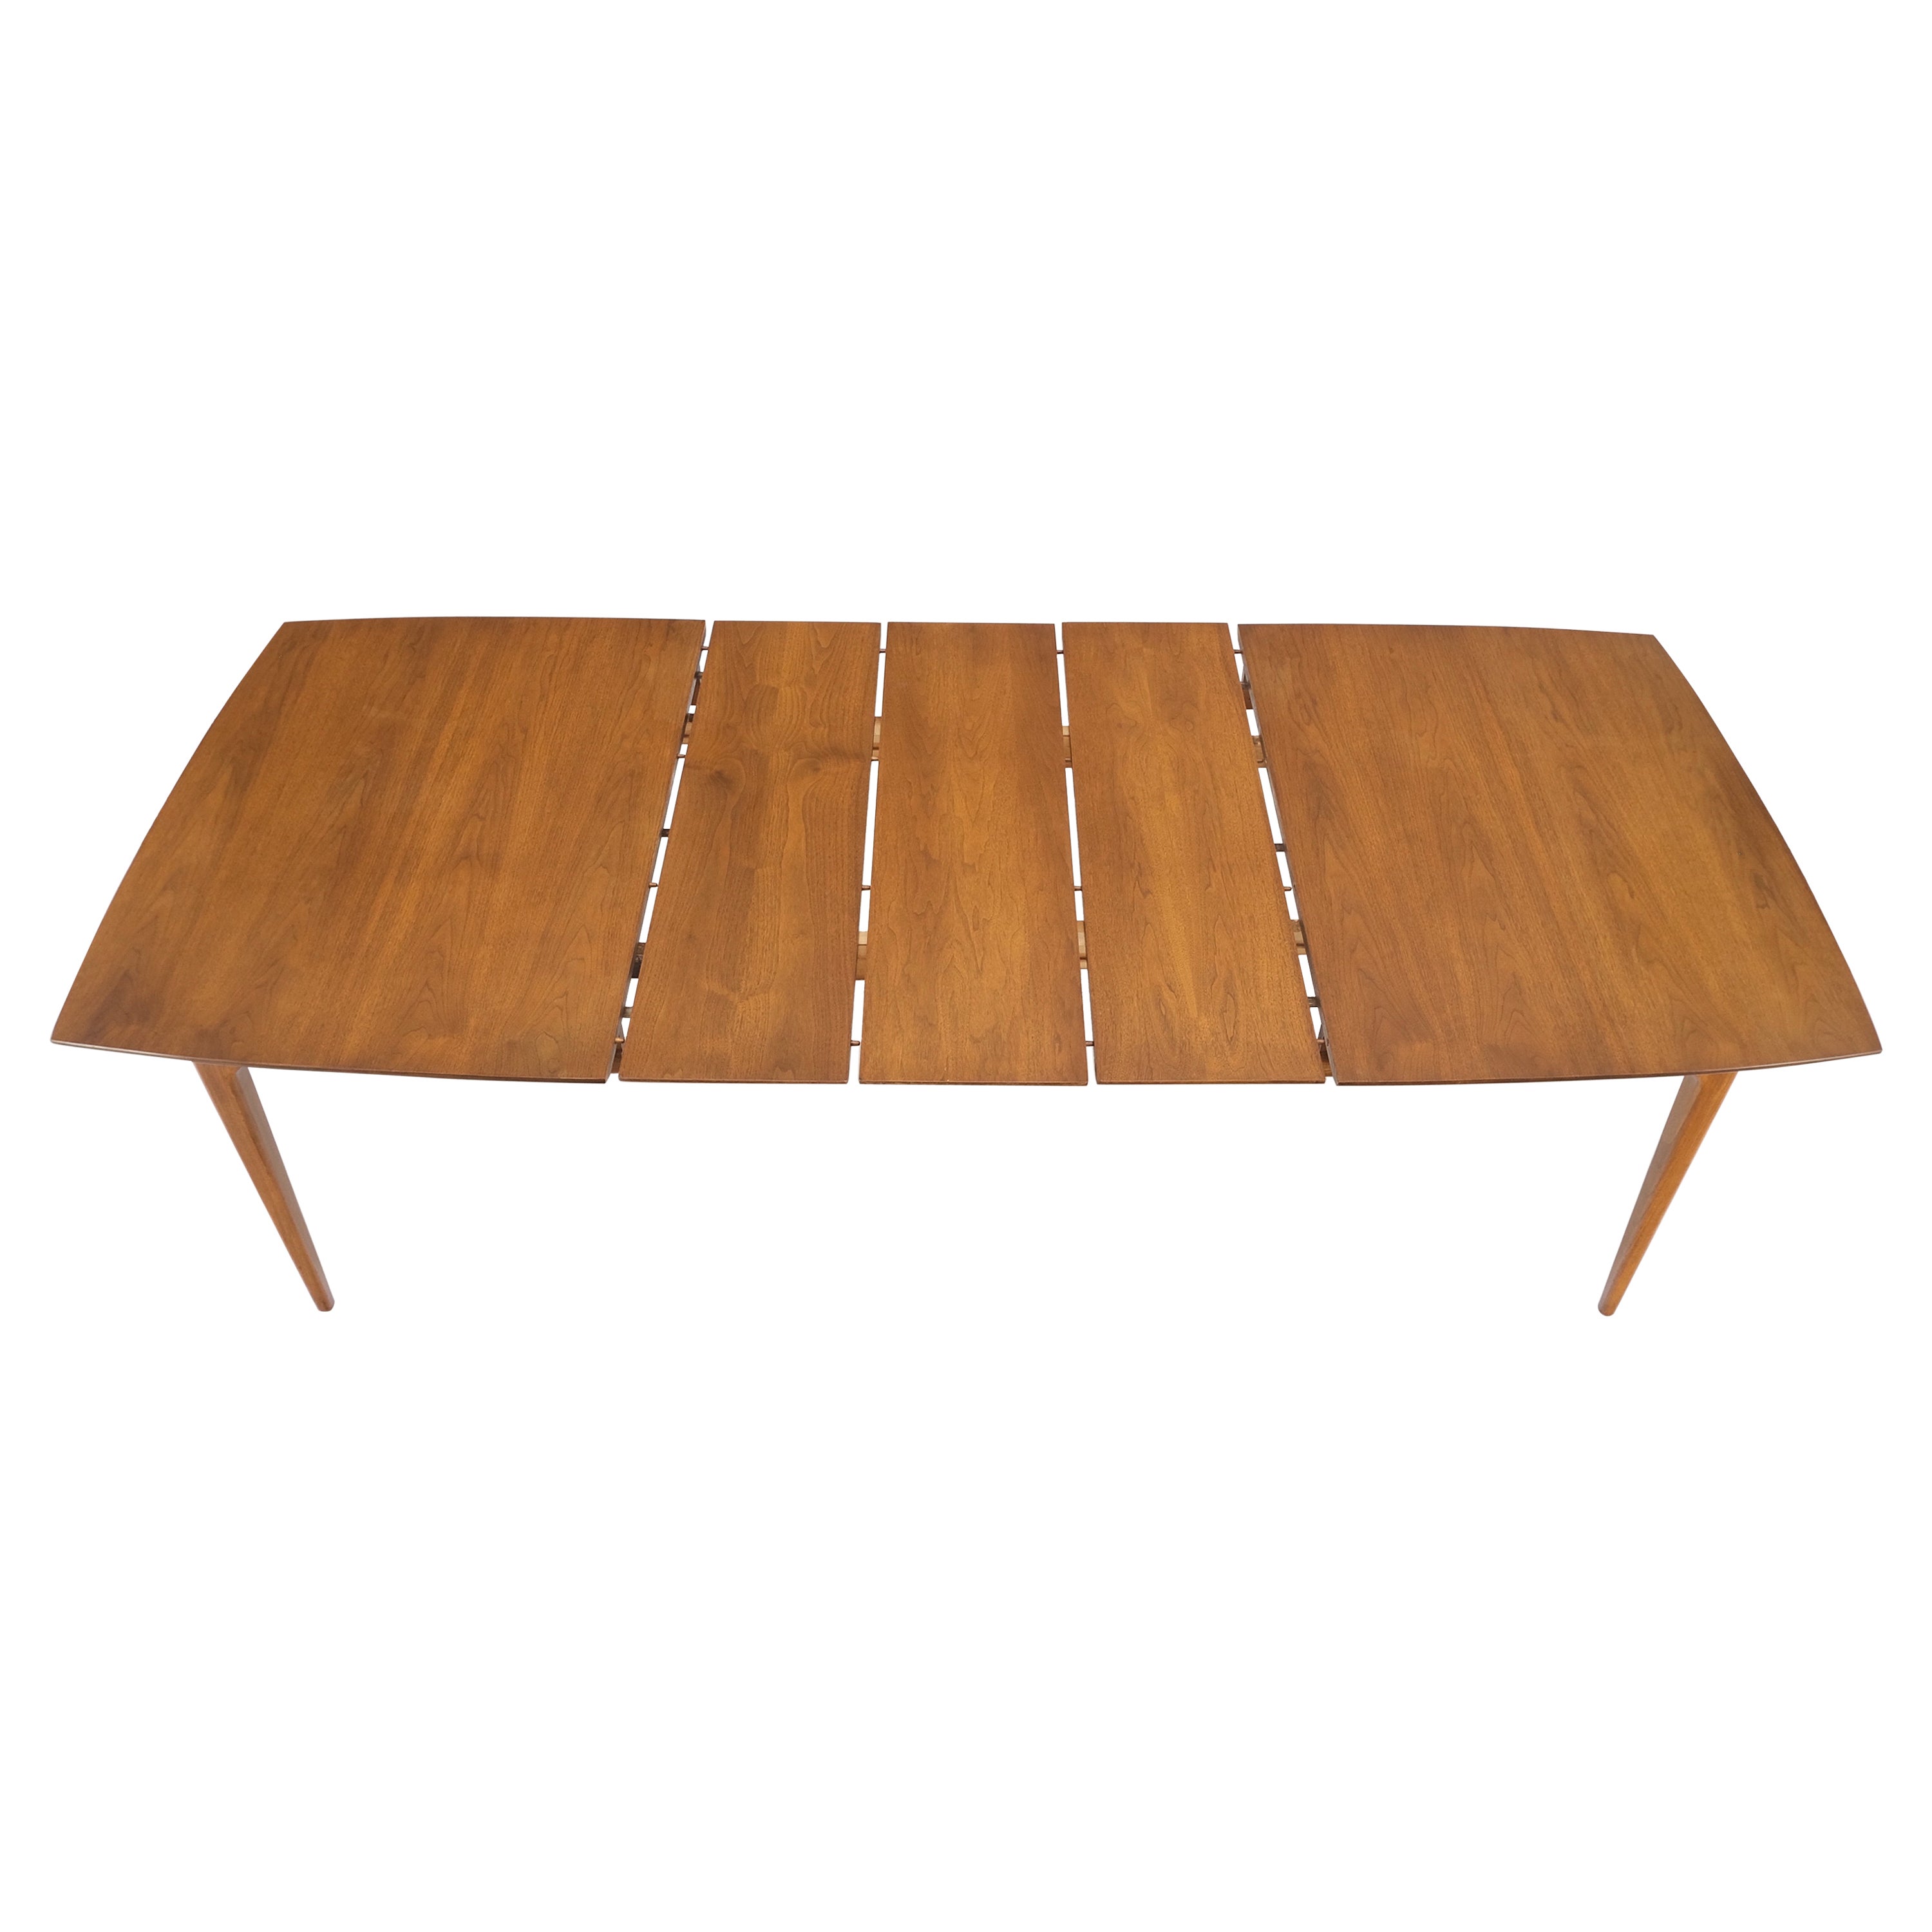 Light Walnut American Mid-Century Modern Boat Shape Dining Table 3 Leaves Mint! For Sale